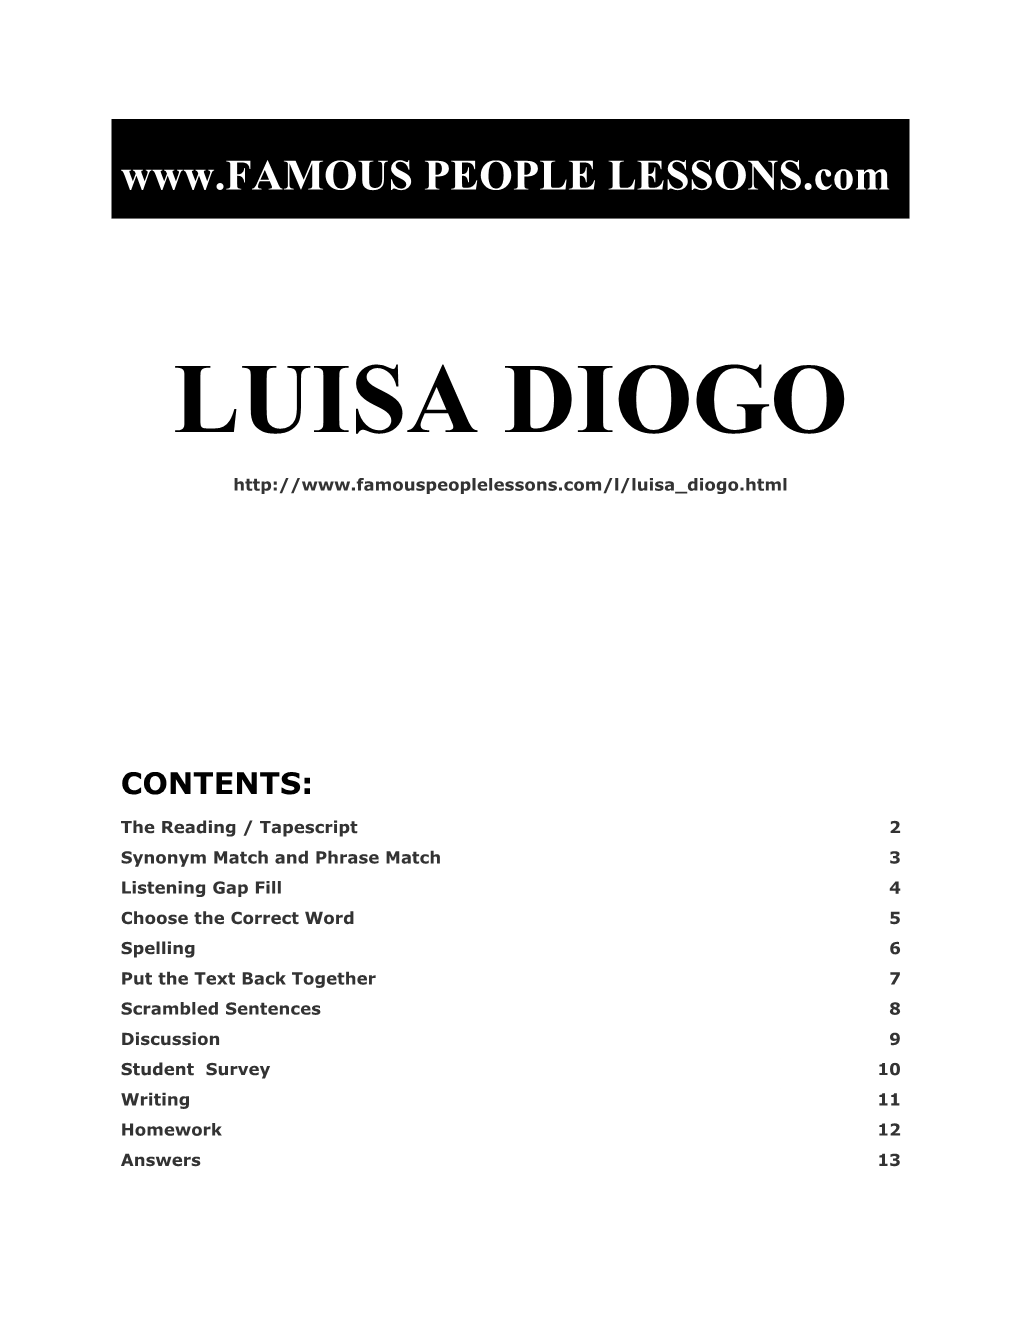 Famous People Lessons - Luisa Diogo